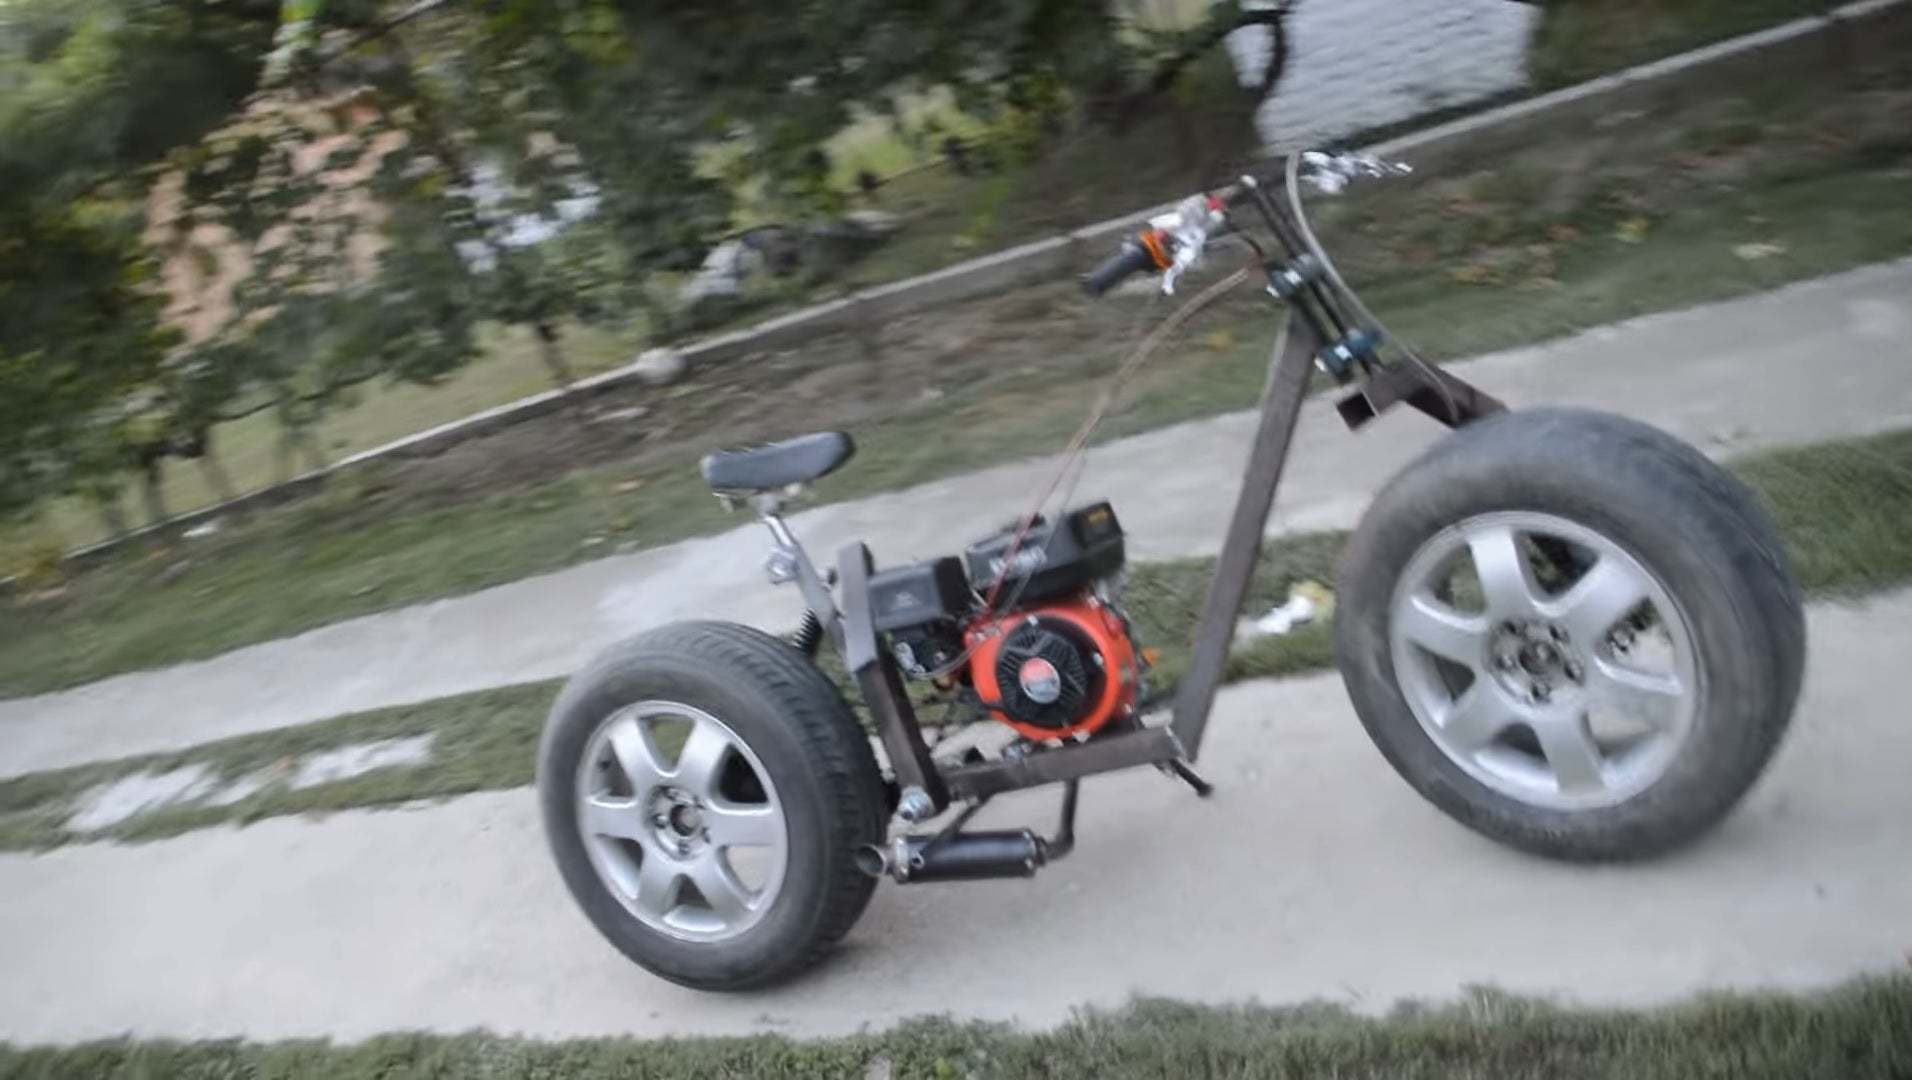 Build A Motorcycle From The Scraps Laying Around Your Garage